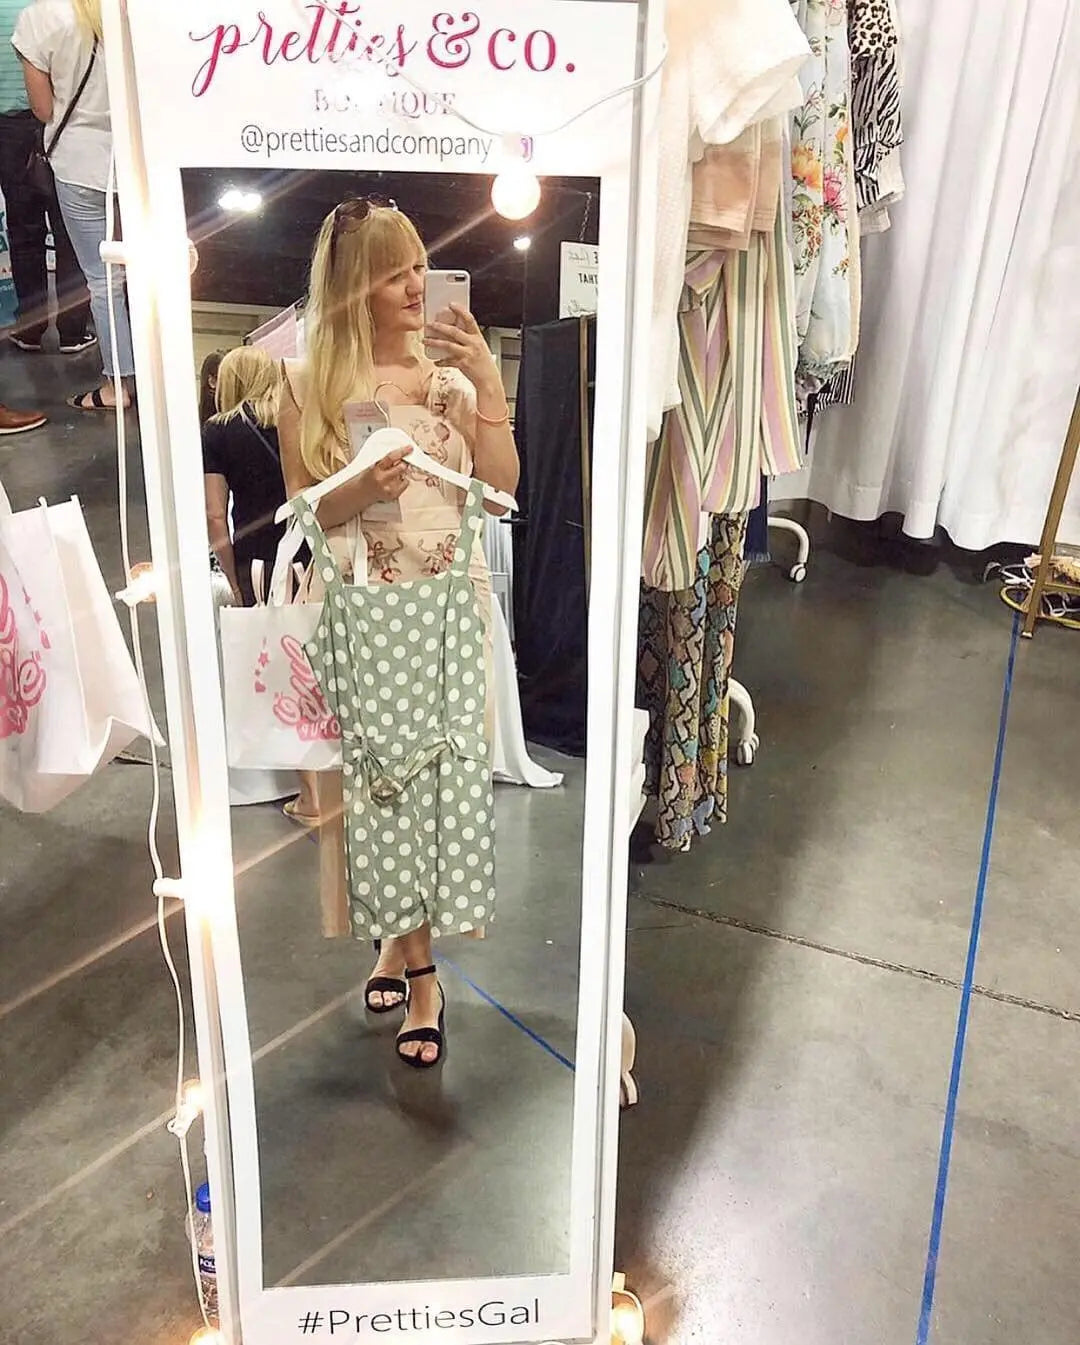 Custom Selfie Station Mirror Cling in boutique smiling woman taking photo while shopping.